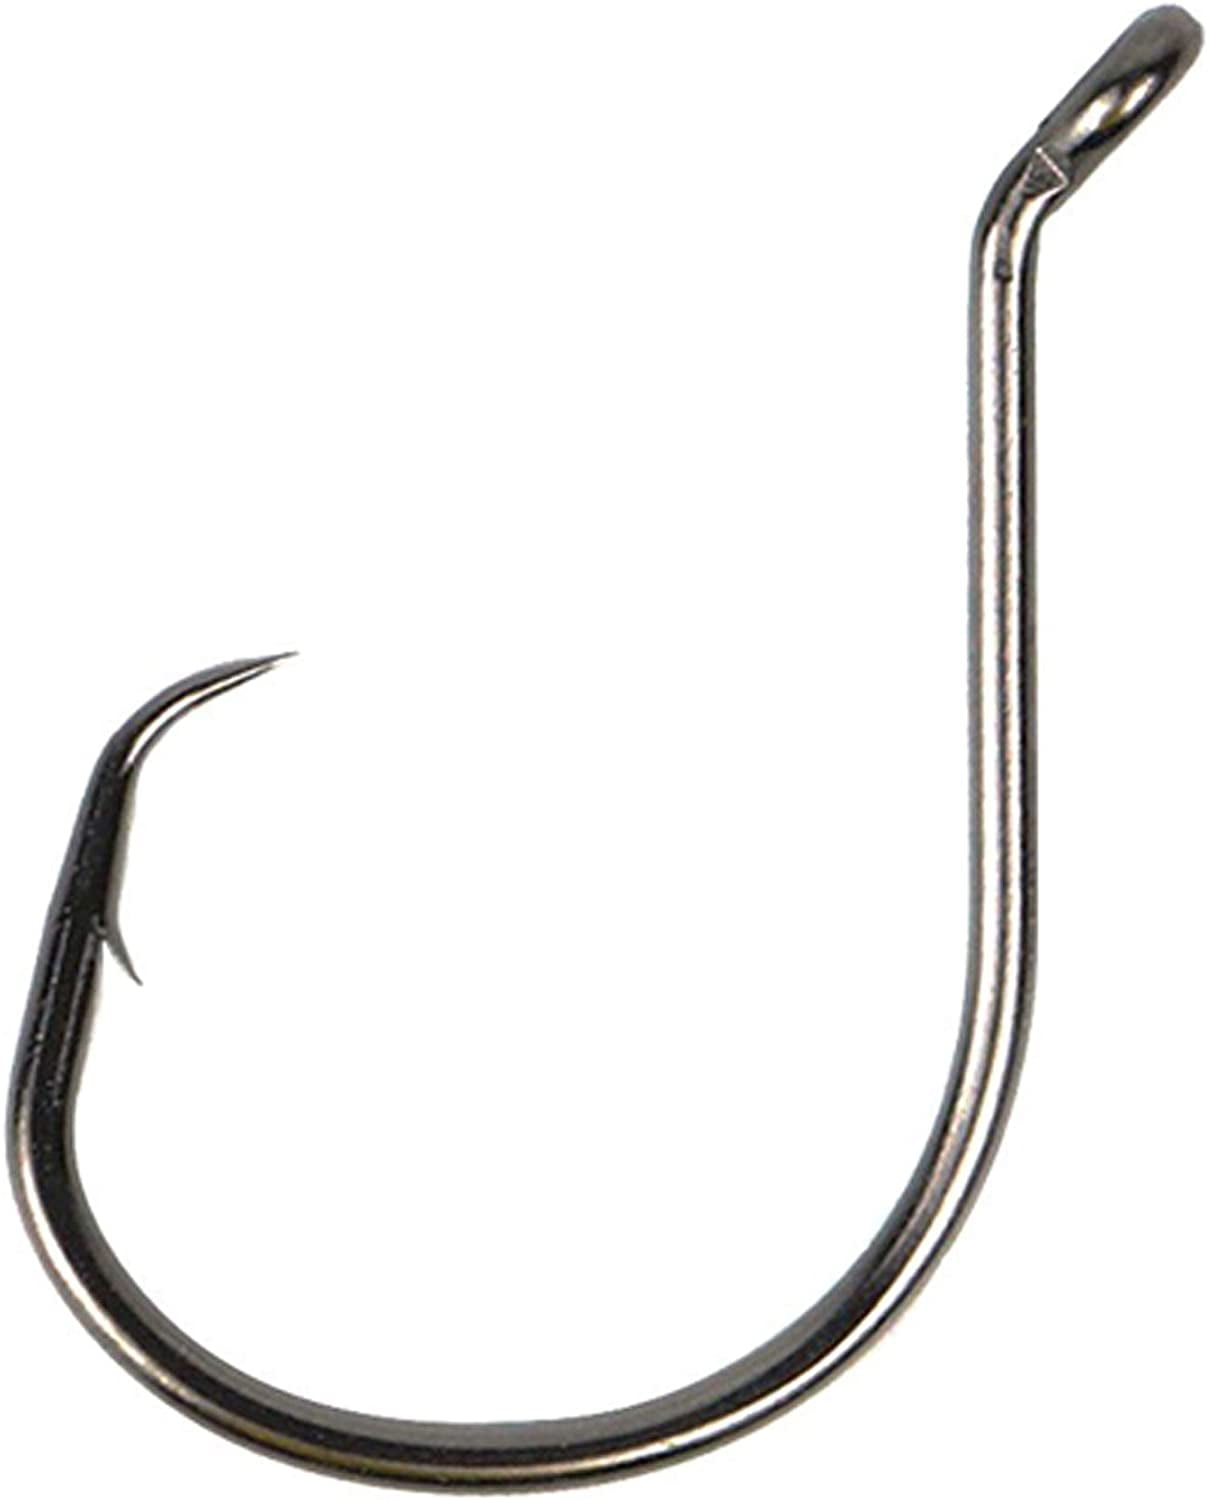 Stellar UltraPoint Wide Gap 9/0 (100 Pack) Circle Hook, Offset Circle Extra  Fine Wire Hook for Catfish, Carp, Bluegill to Tuna. Saltwater or Freshwater Fishing  Hooks, Gear and Equipment 